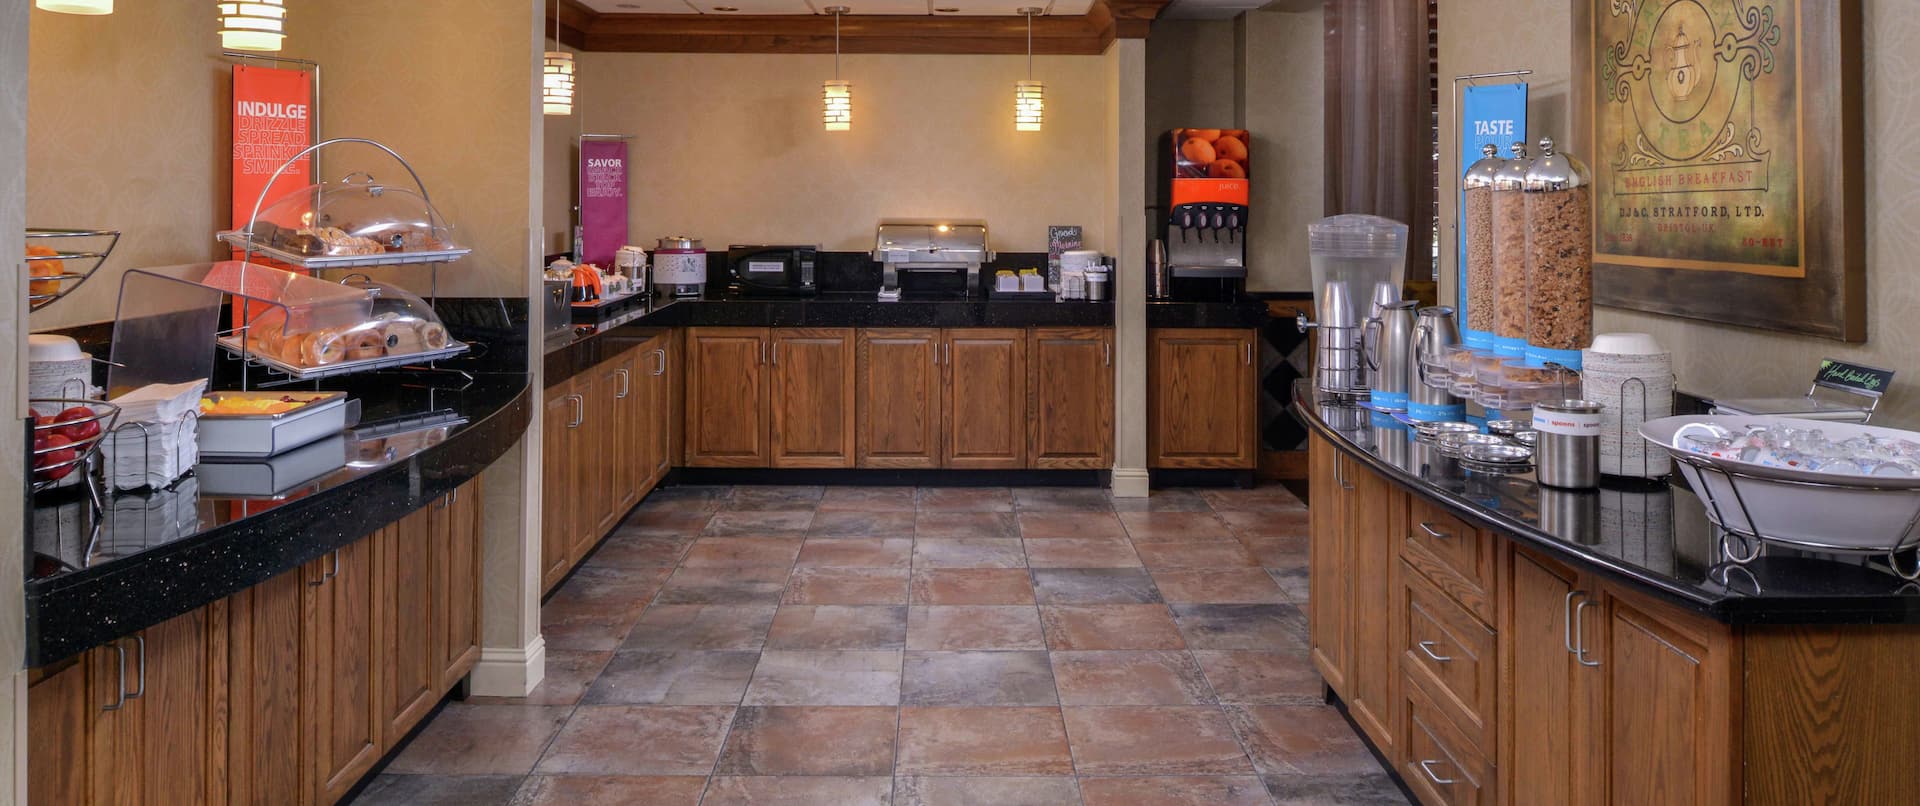 Breakfast Bar Area with Fresh and Hot Food Options 